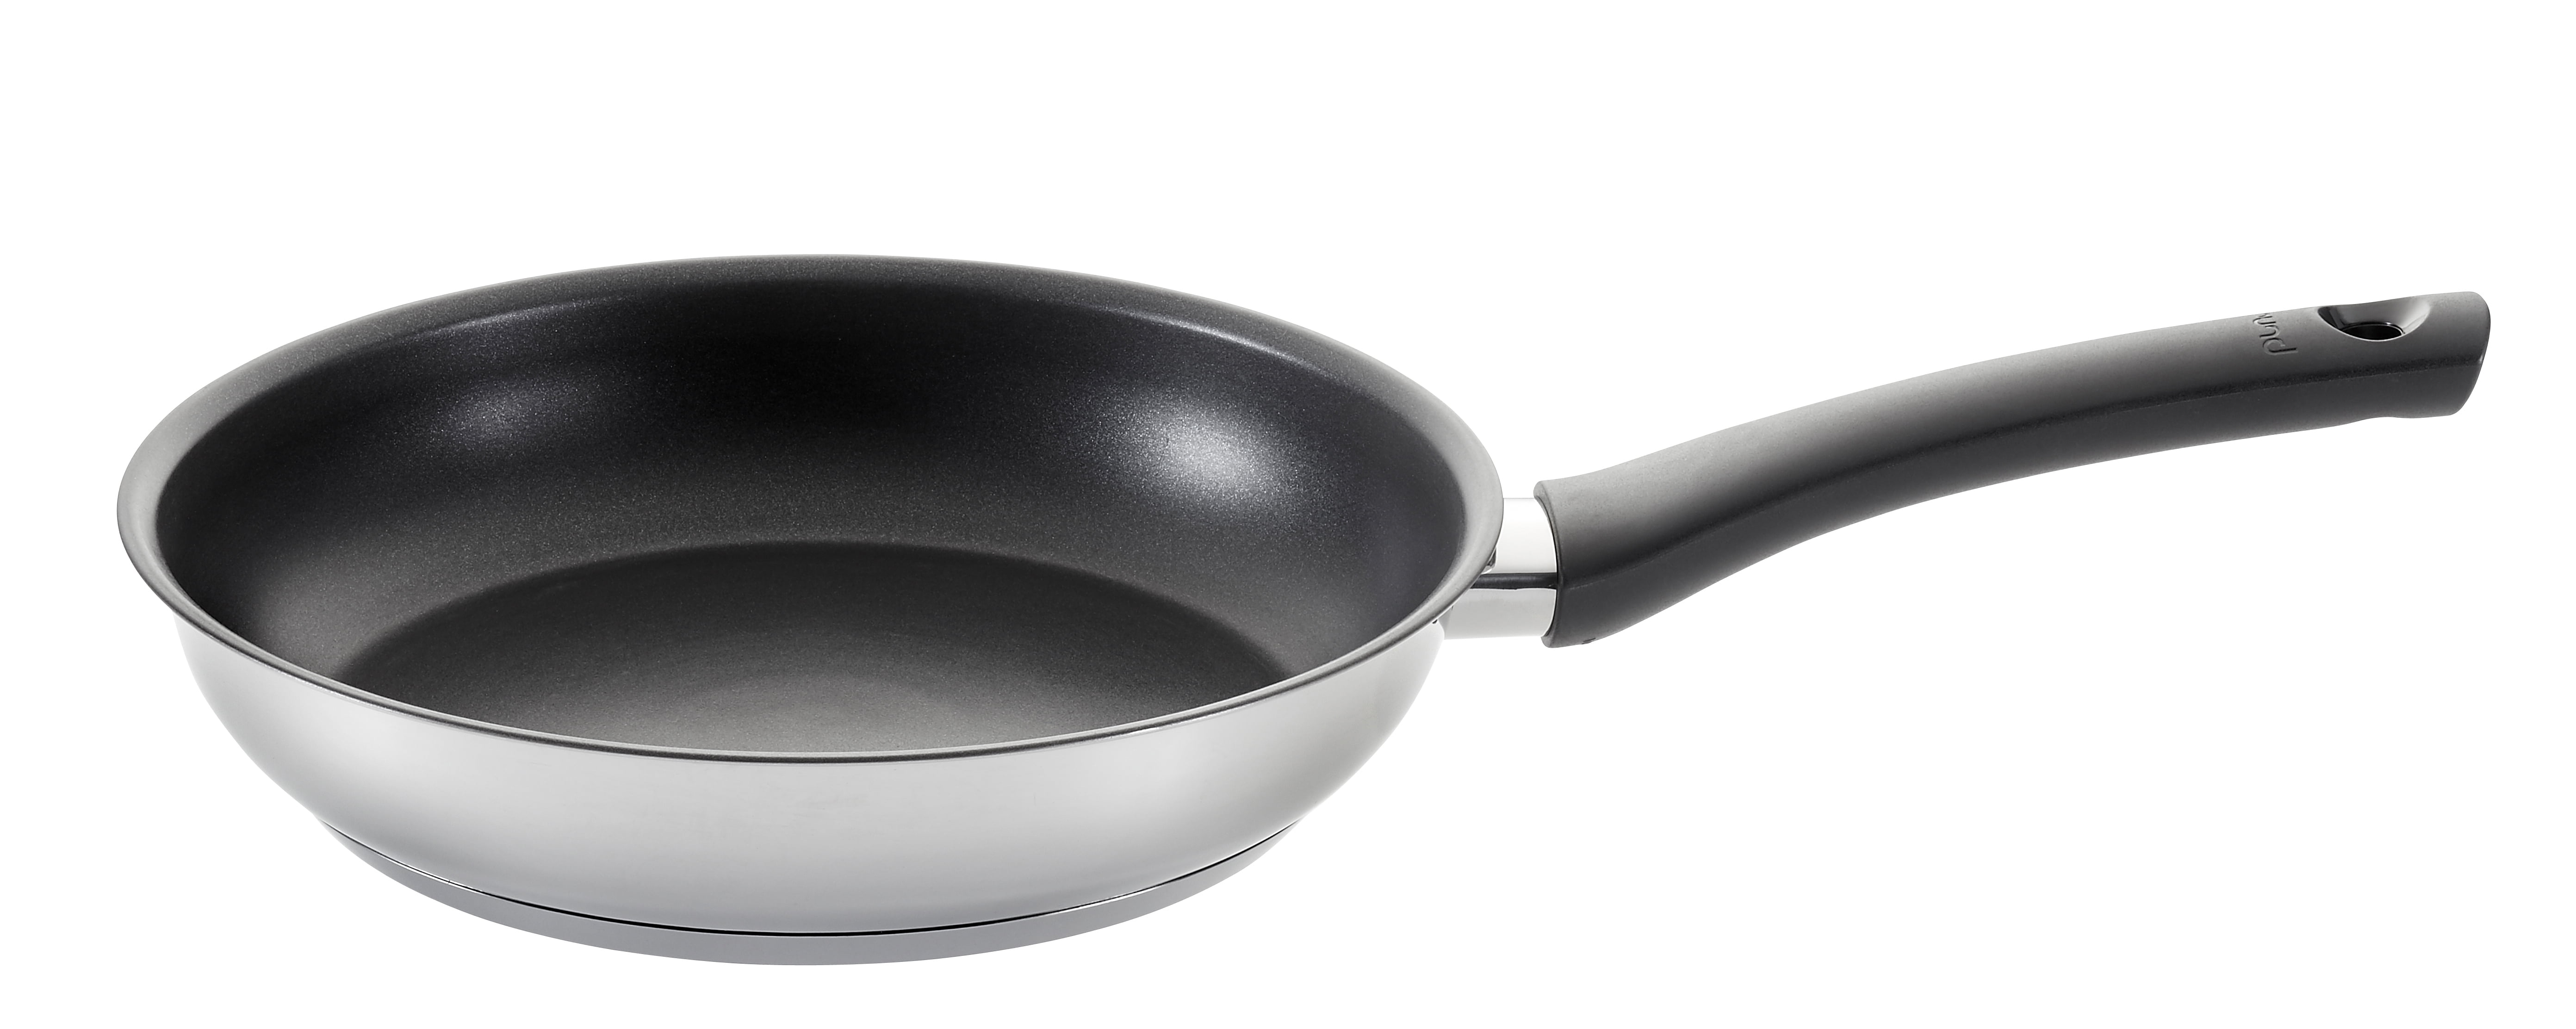 Starfrit 034609-004-0000 Stainless Steel Non Stick  9.5 Inch  Fry Pan 